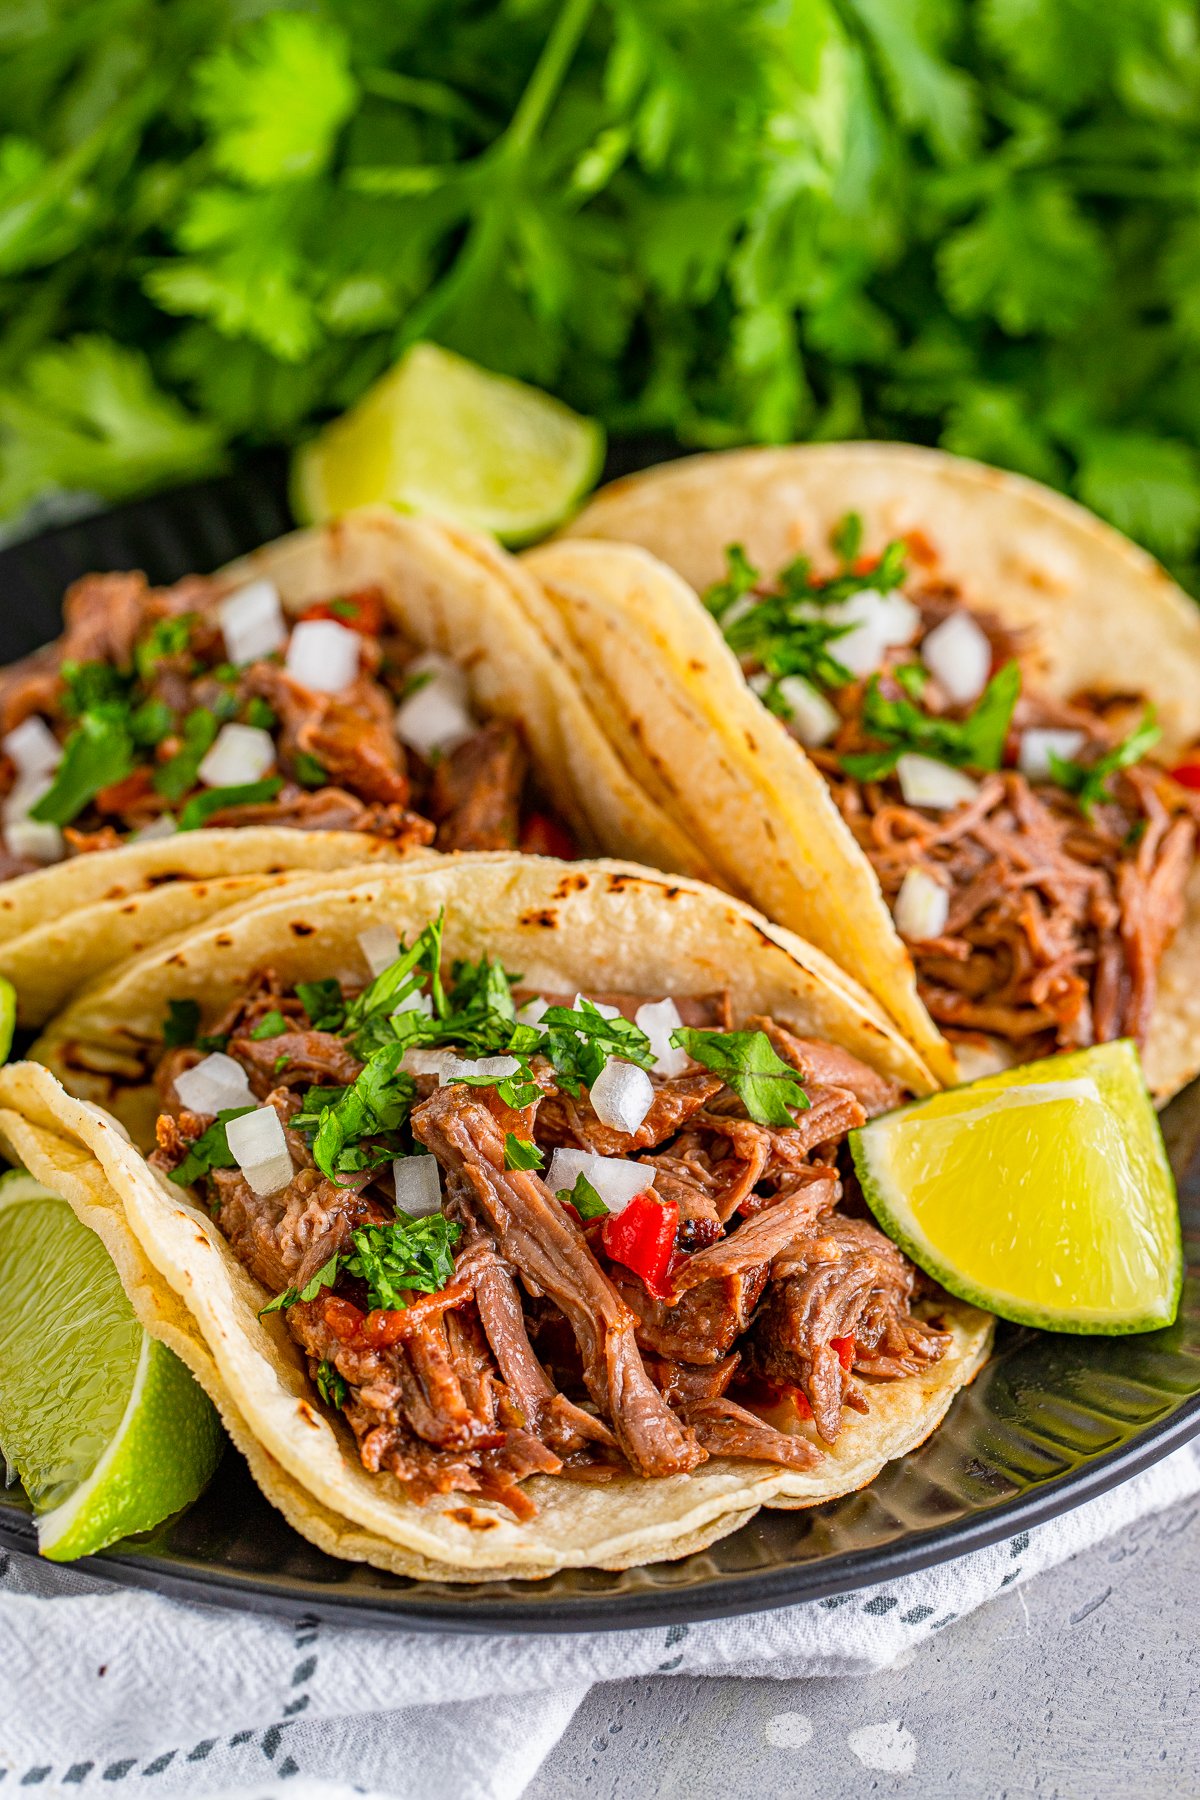 Three slow cooker Shredded Beef Tacos on black plate with toppings and lime garnishes.